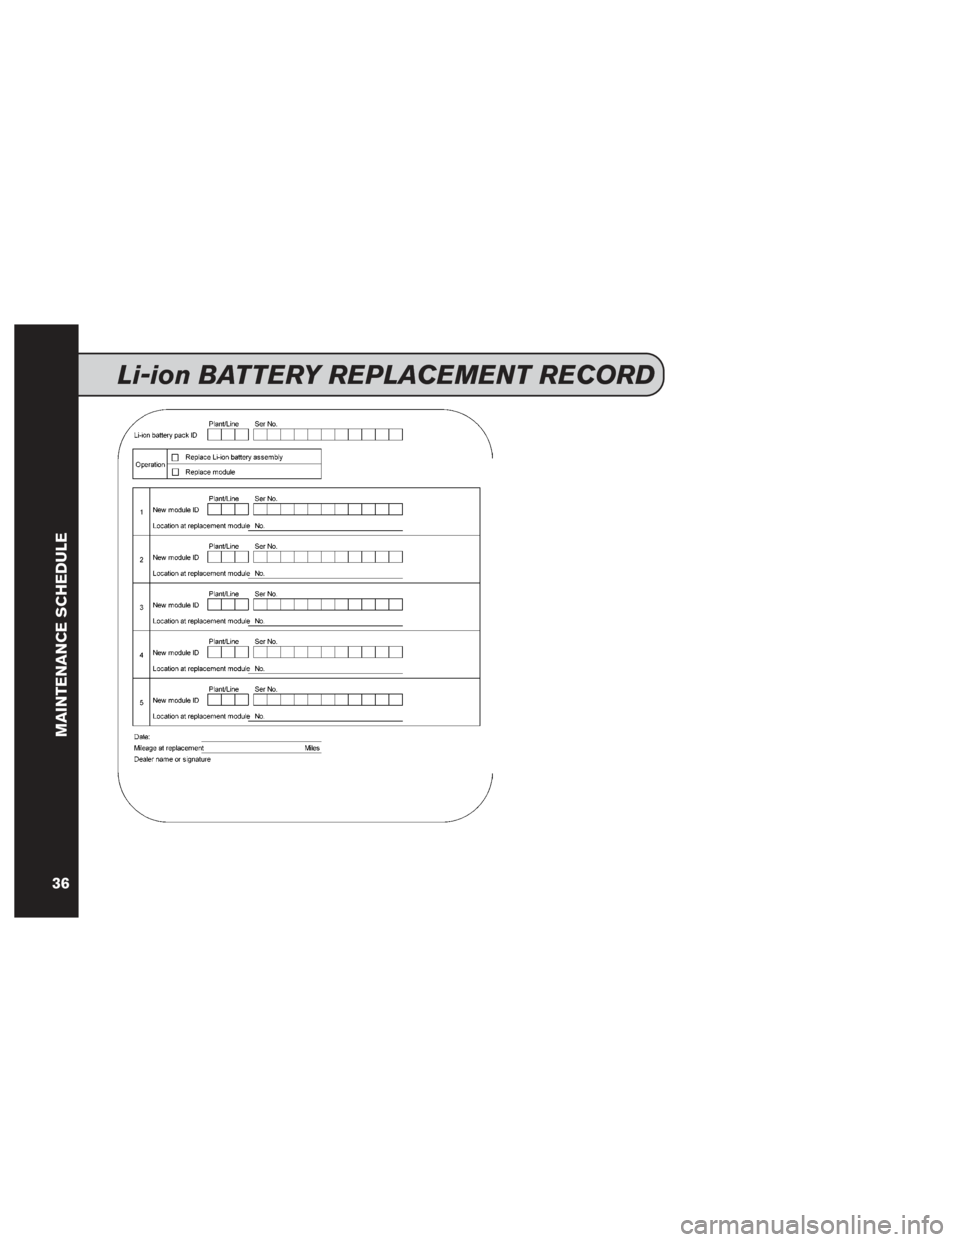 NISSAN LEAF 2016 1.G Service And Maintenance Guide Li-ion BATTERY REPLACEMENT RECORD
MAINTENANCE SCHEDULE
36 